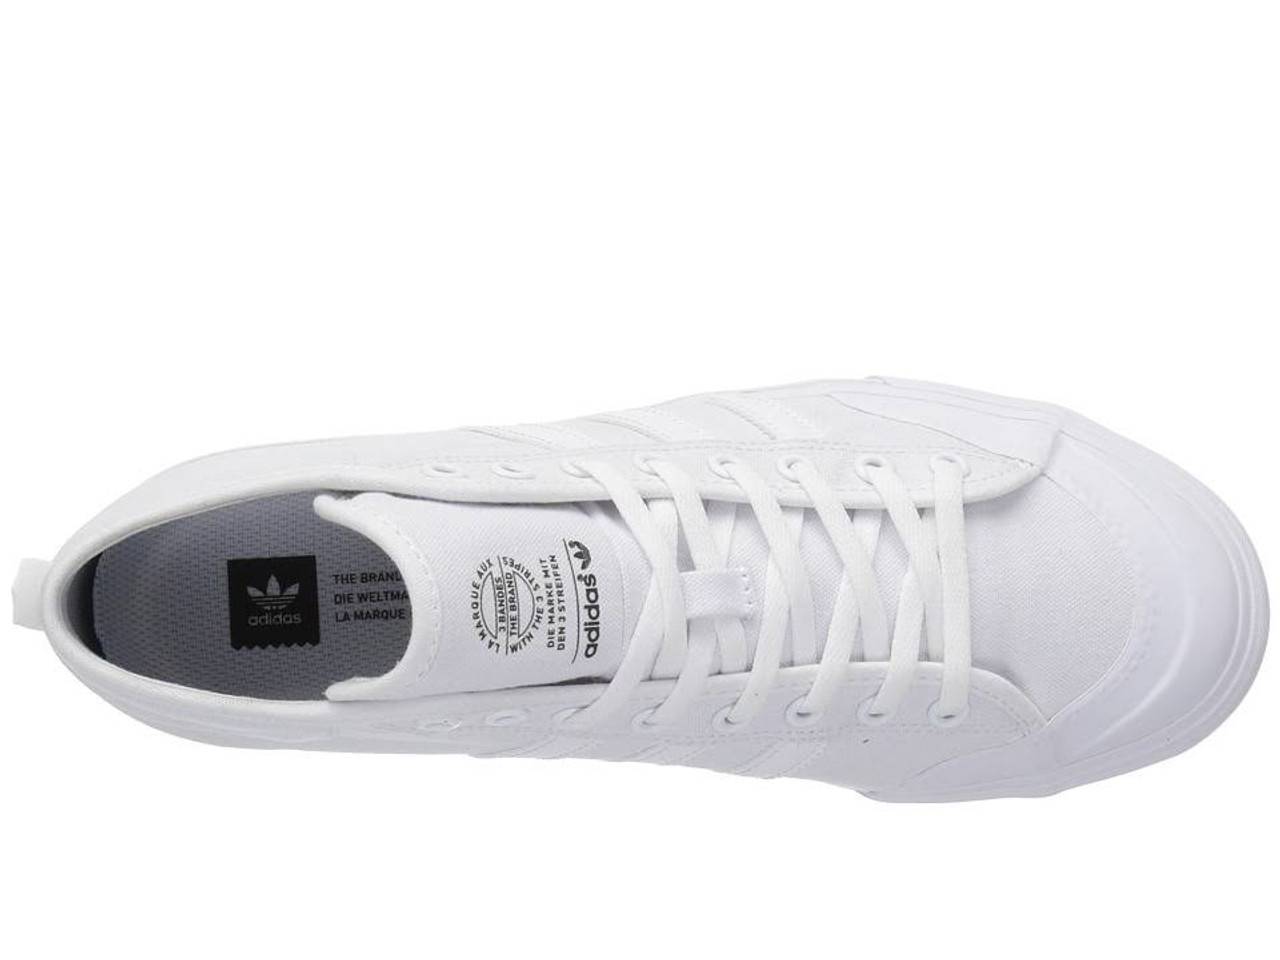 Adidas MatchCourt Mid Shoes All White